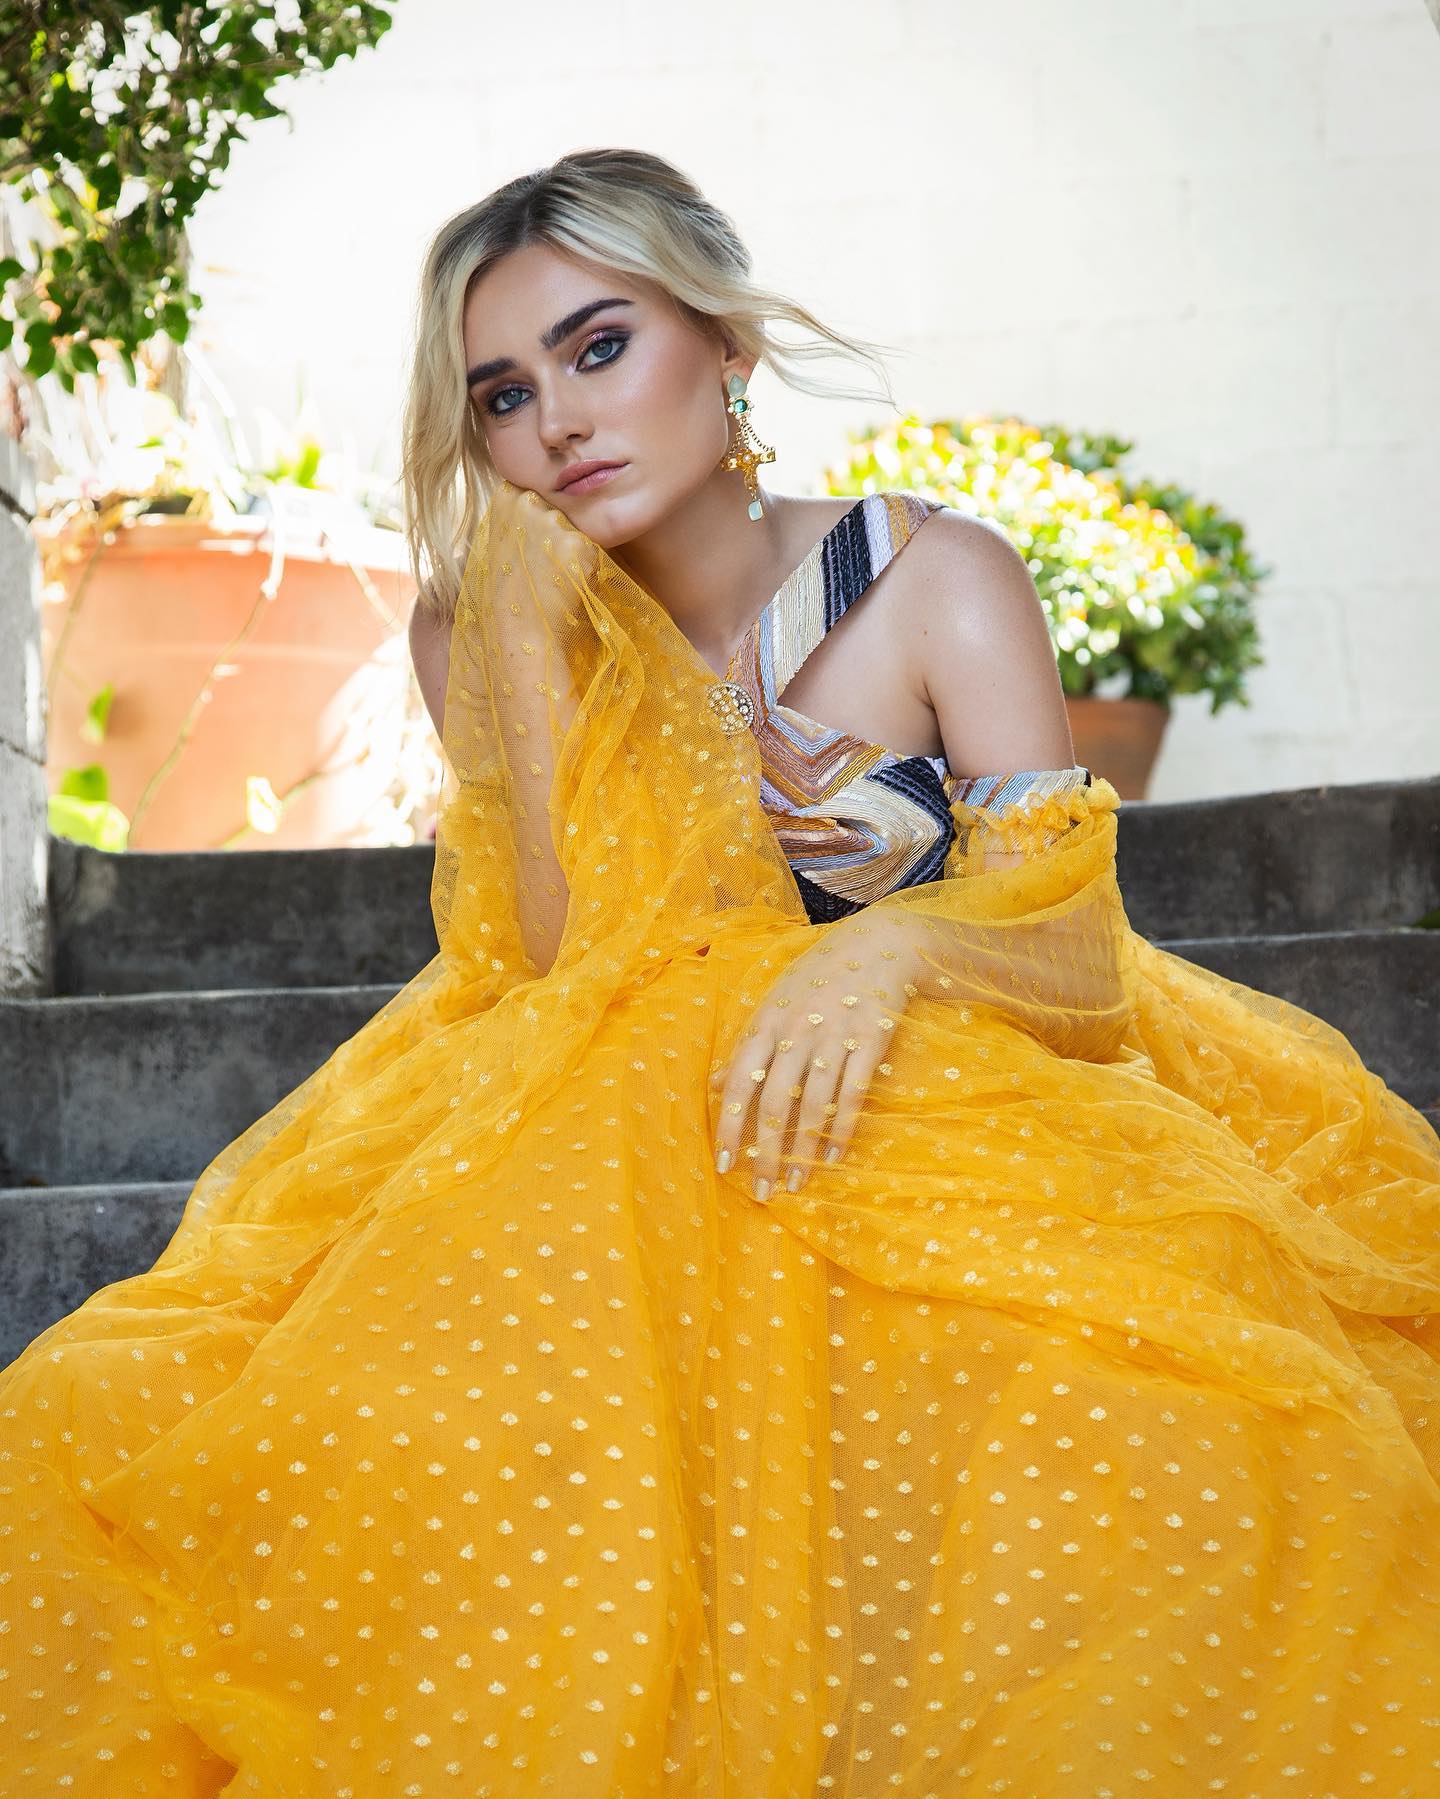 Meg Donnelly Photoshoot for Jejune Magazine, May 2022 Issue